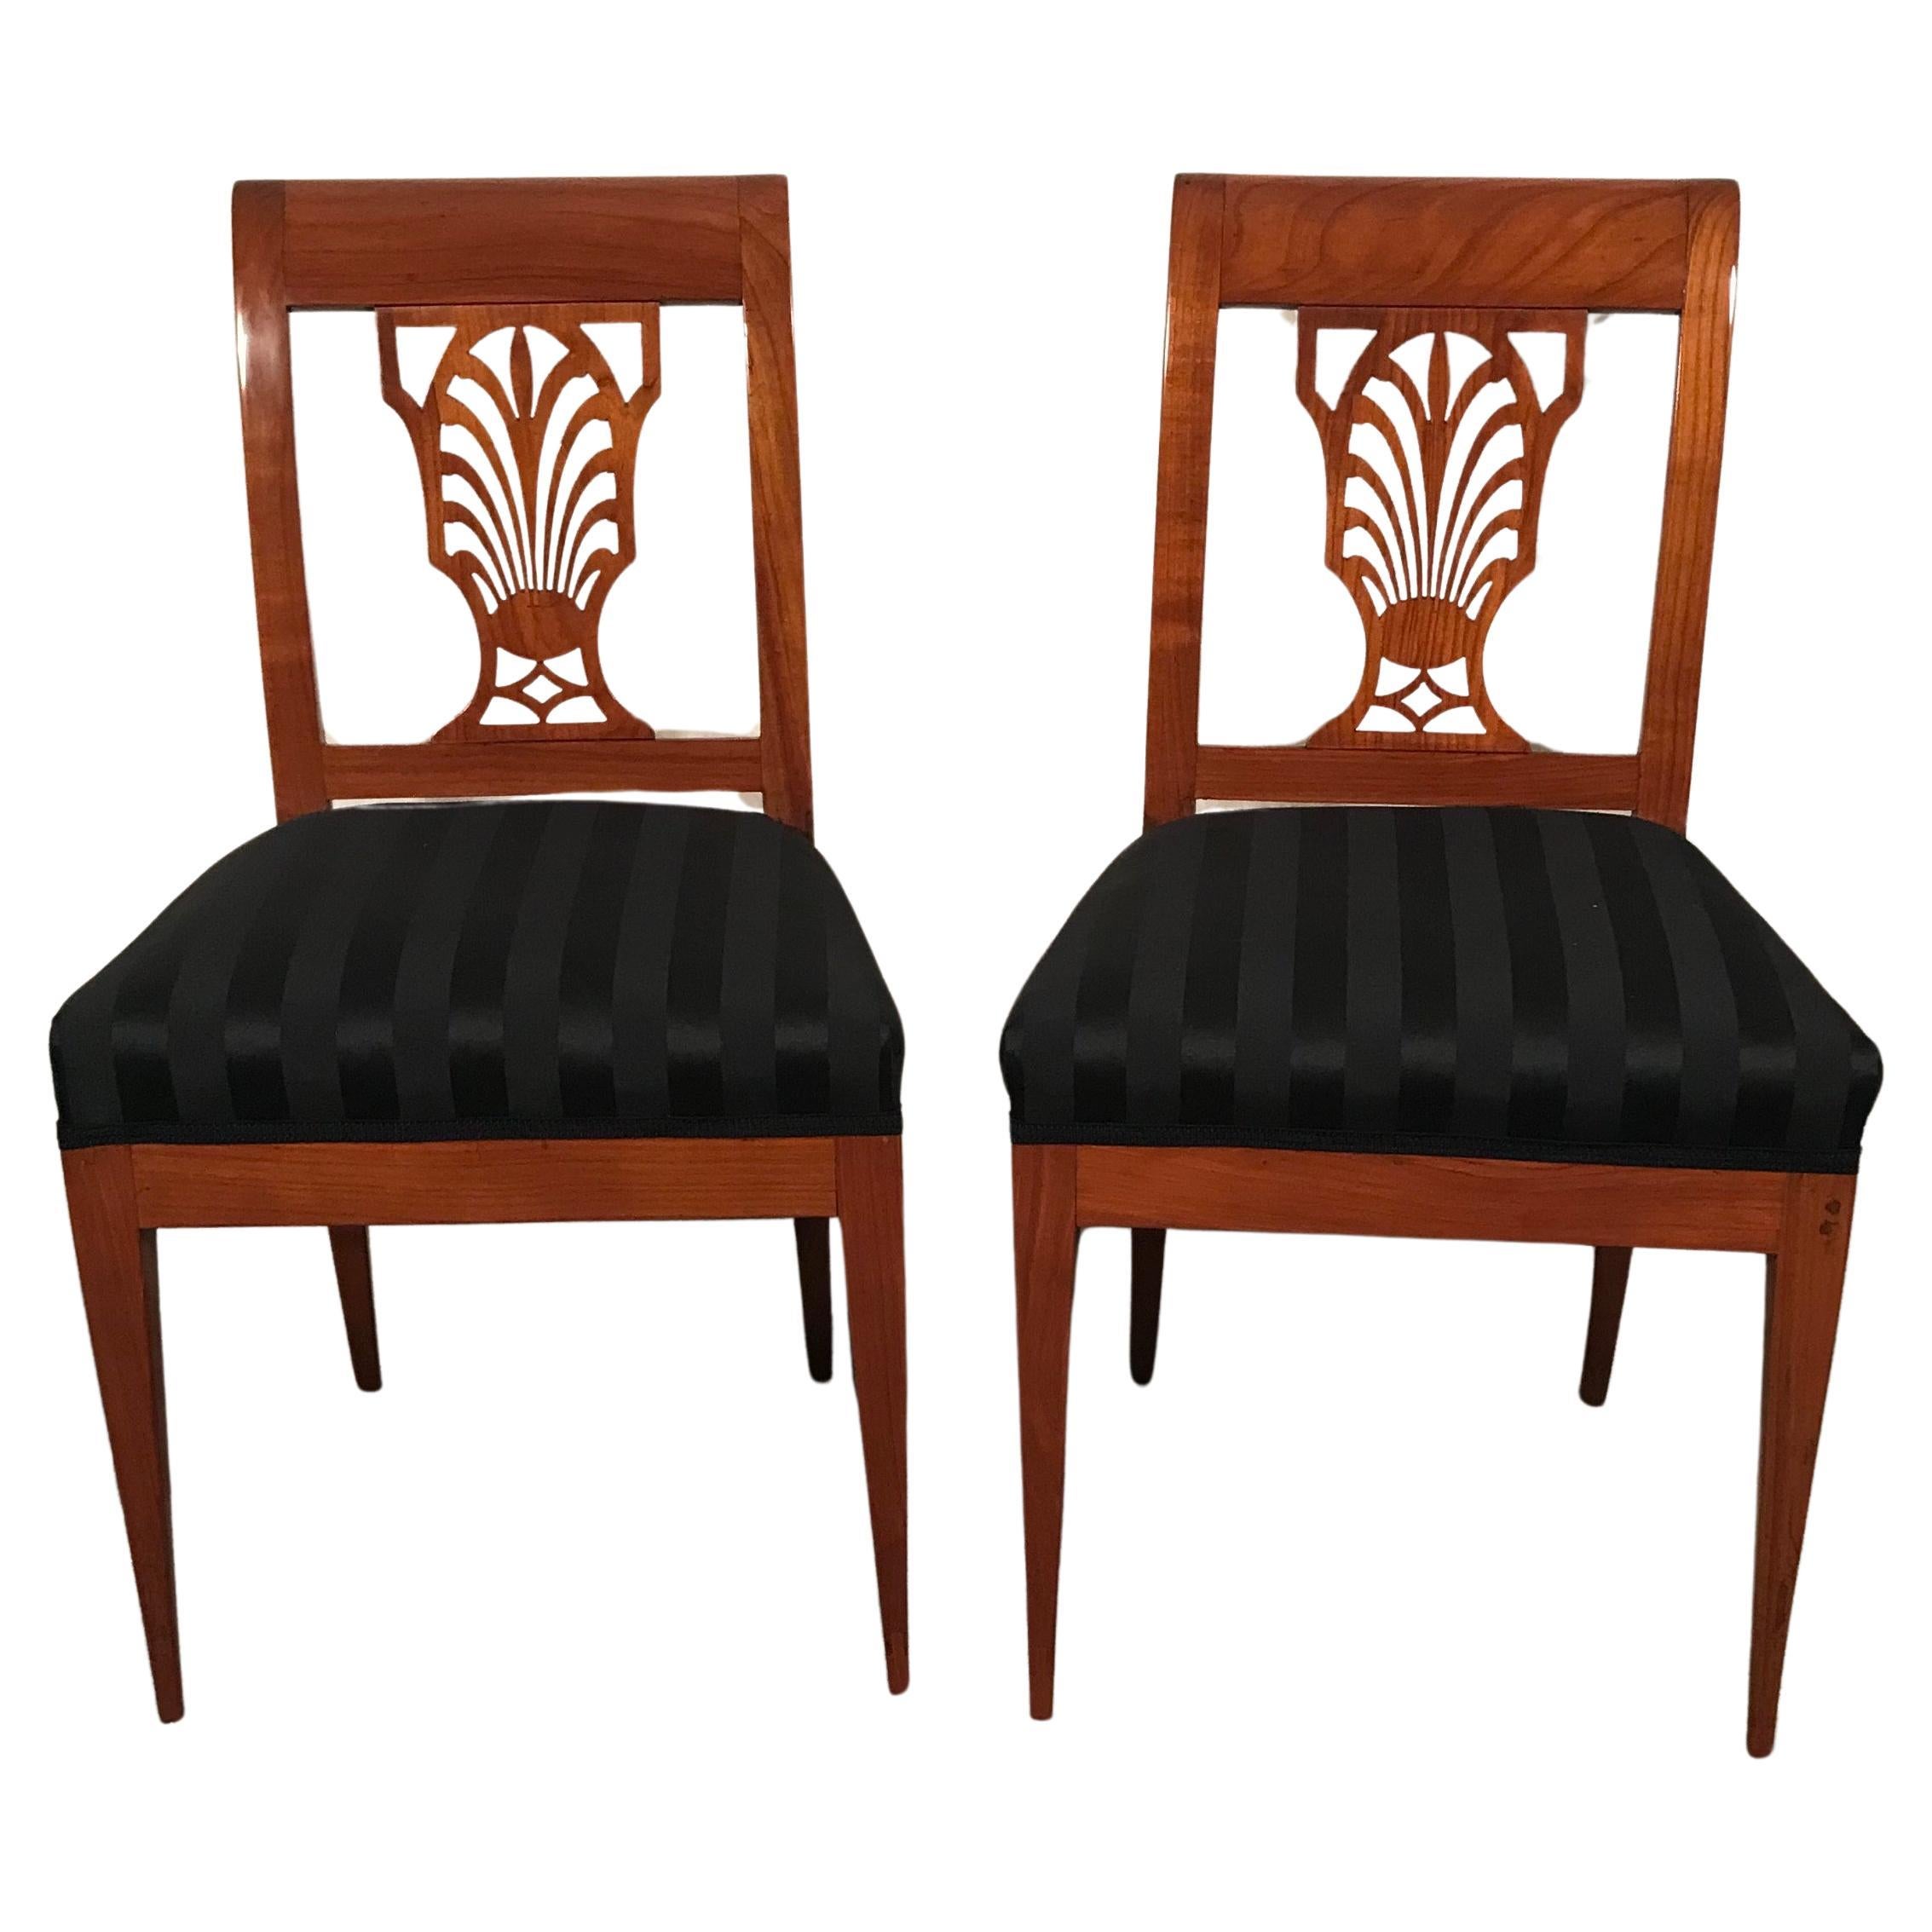 Pair of Neoclassical Side Chairs, South German 1810-20